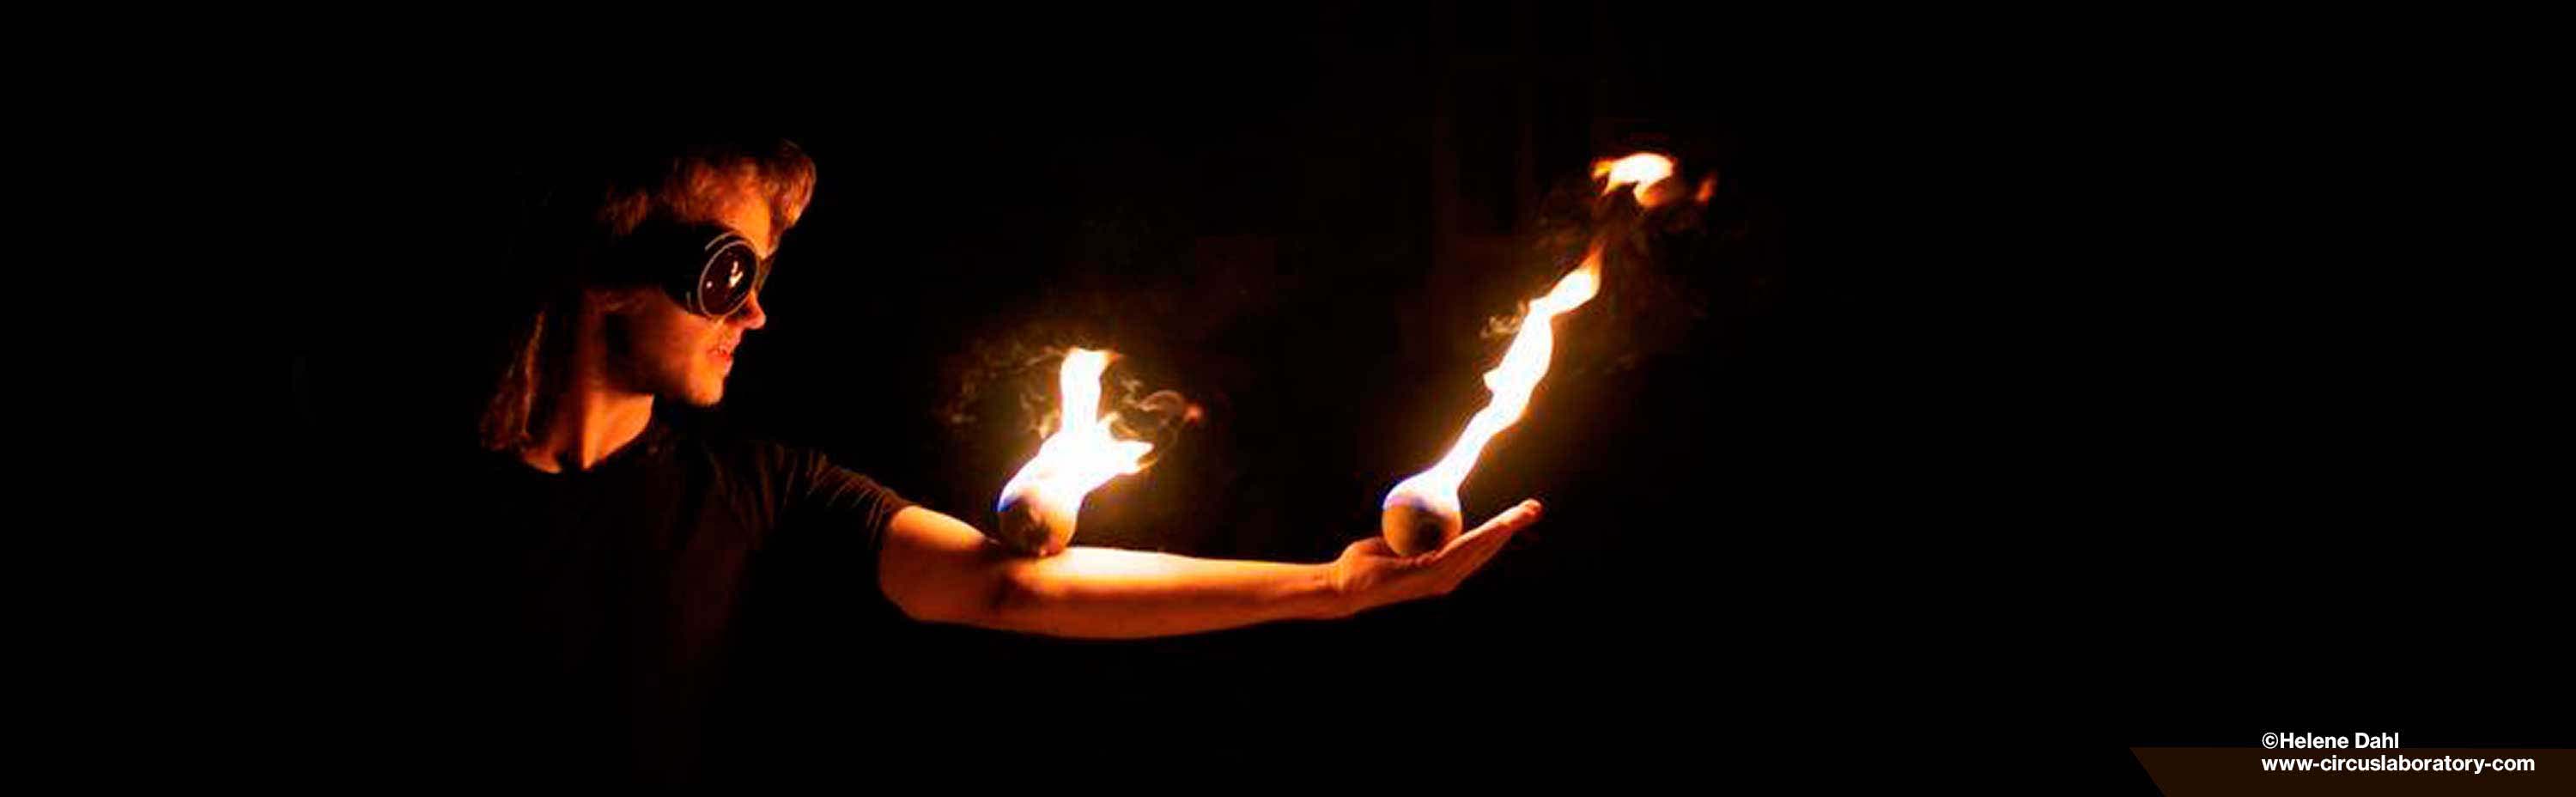 Fire Juggling Pics, Photography Collection